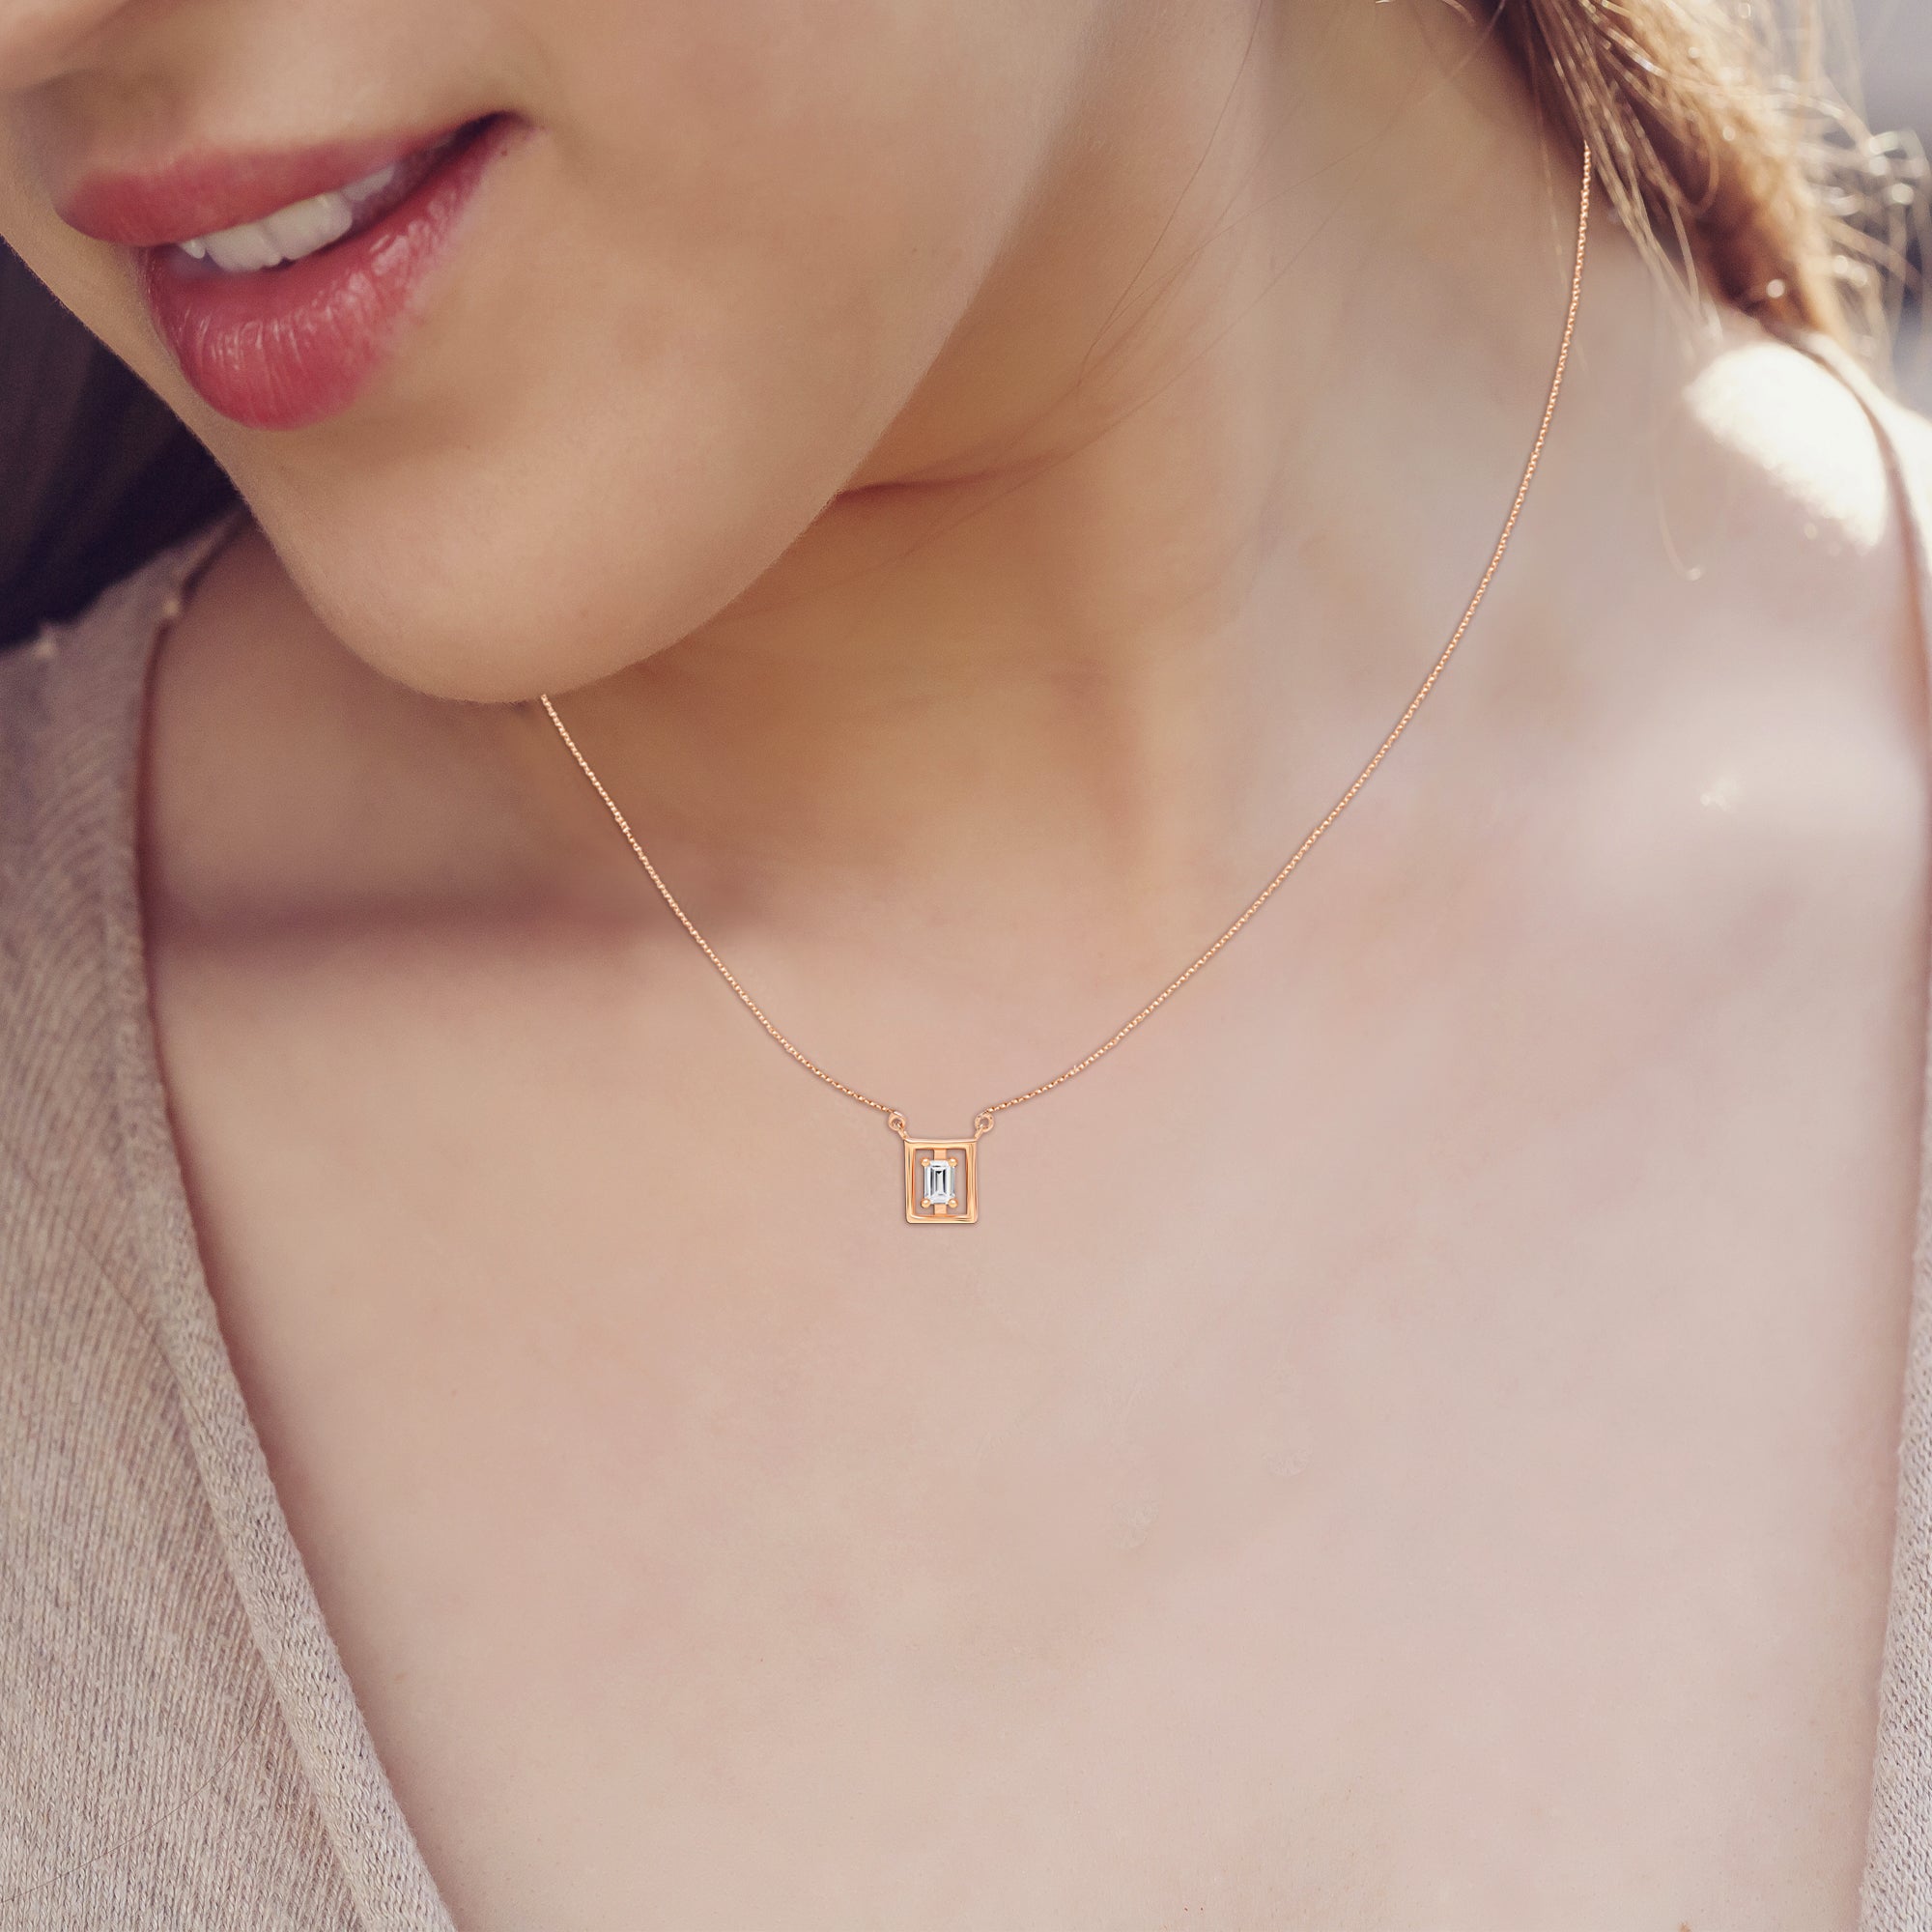 925 Sterling Silver Rose Gold-Plated Square CZ Pendant Necklace for Teen Women